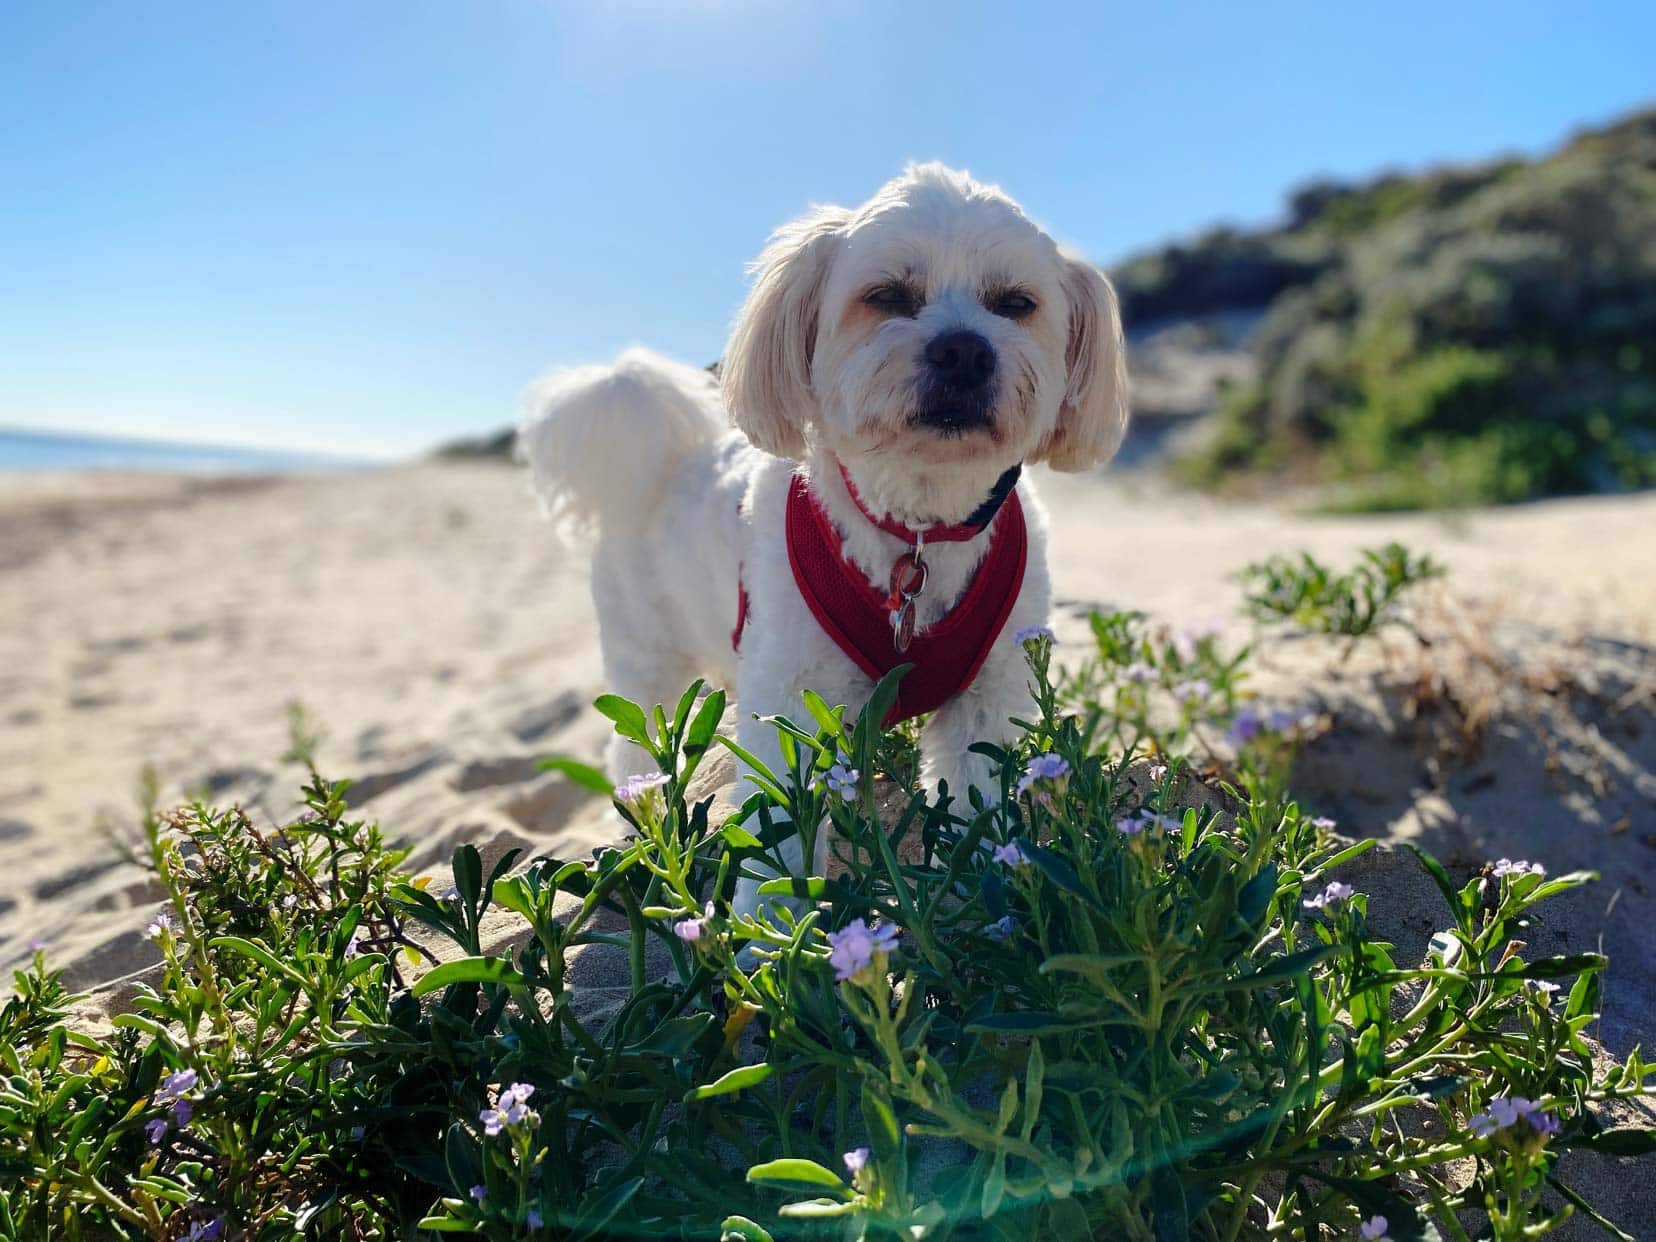 Teddy - a small white dog on the beach in front of some grass and purple flowers